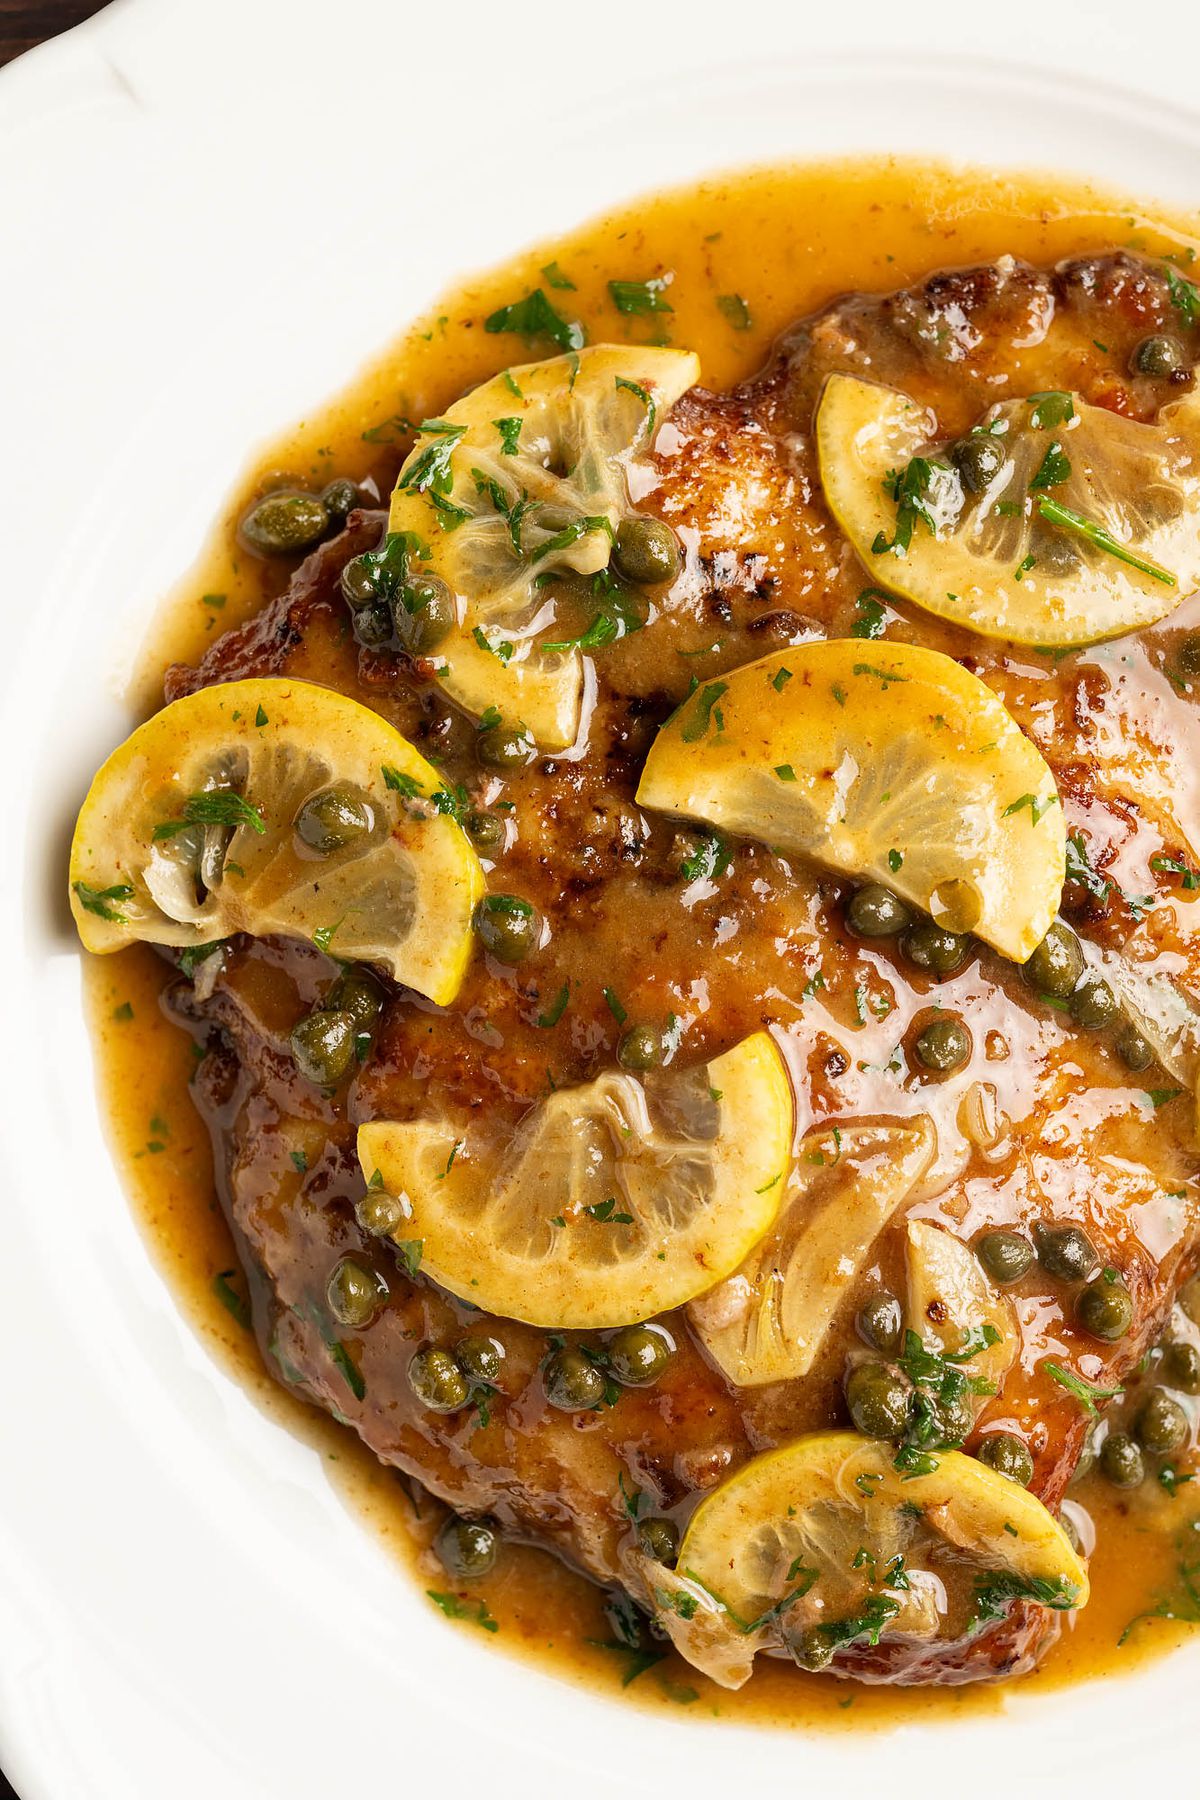 Veal piccata with lemon, capers, and parsley at Donna’s restaurant in Echo Park, California.